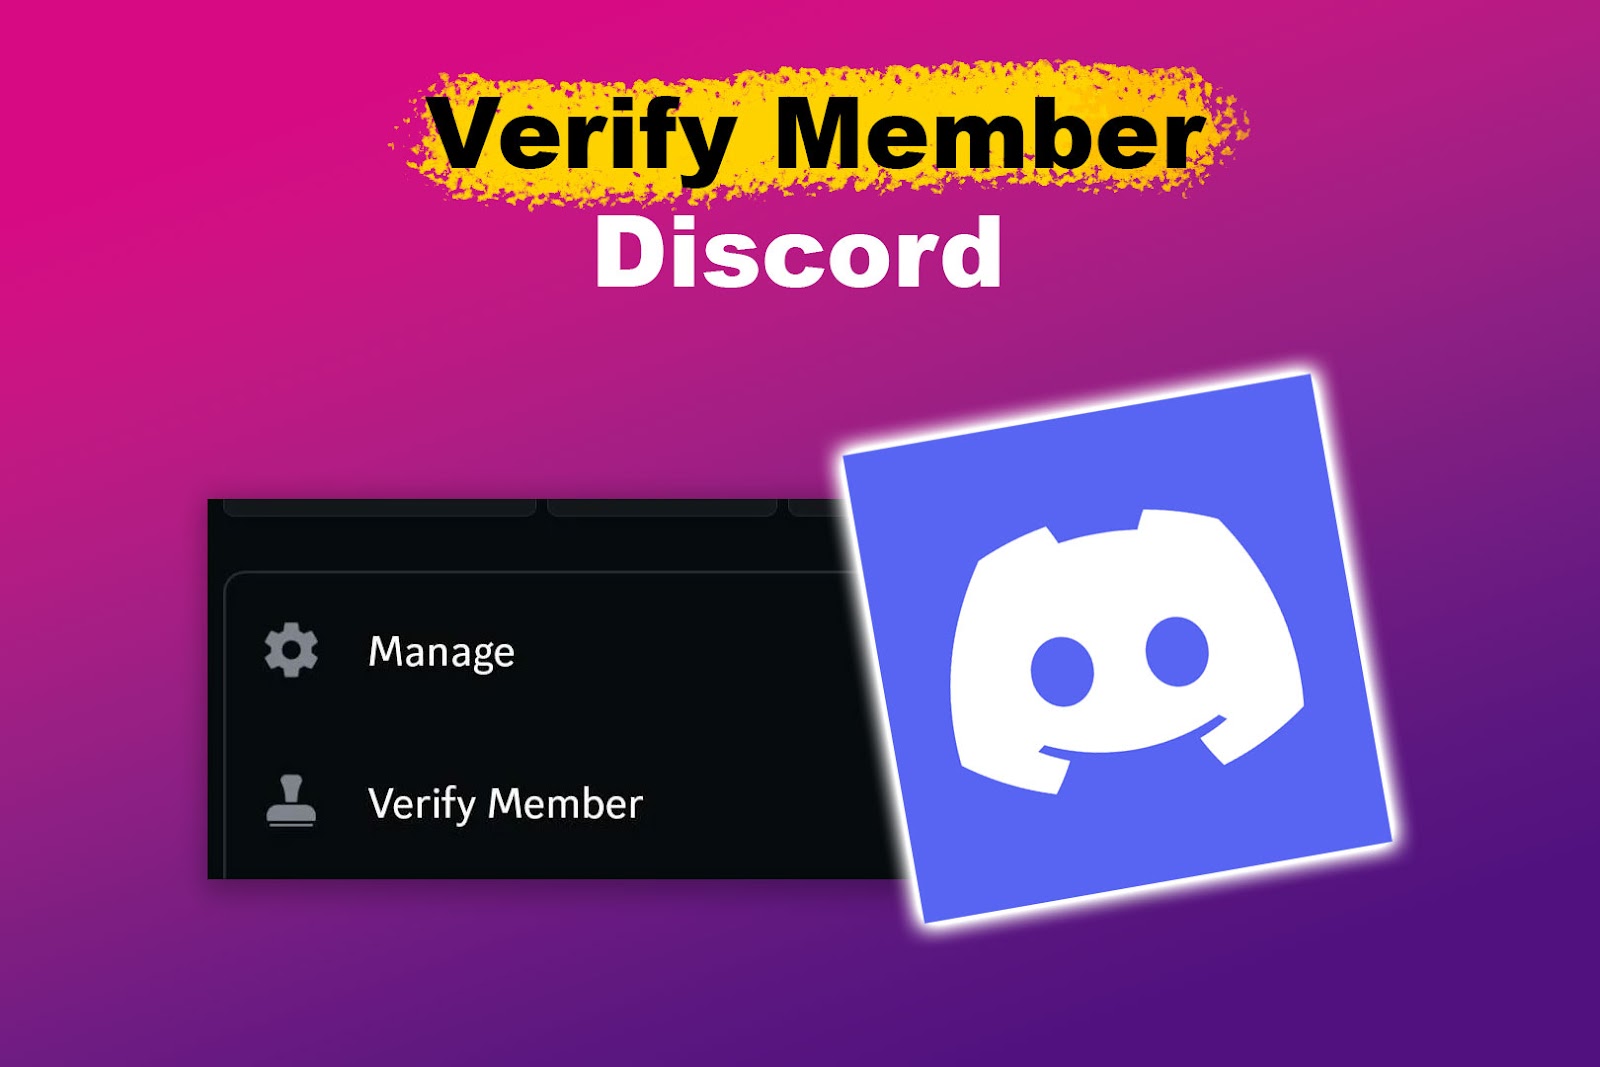 Verify Member Discord [Everything You Need to Know]